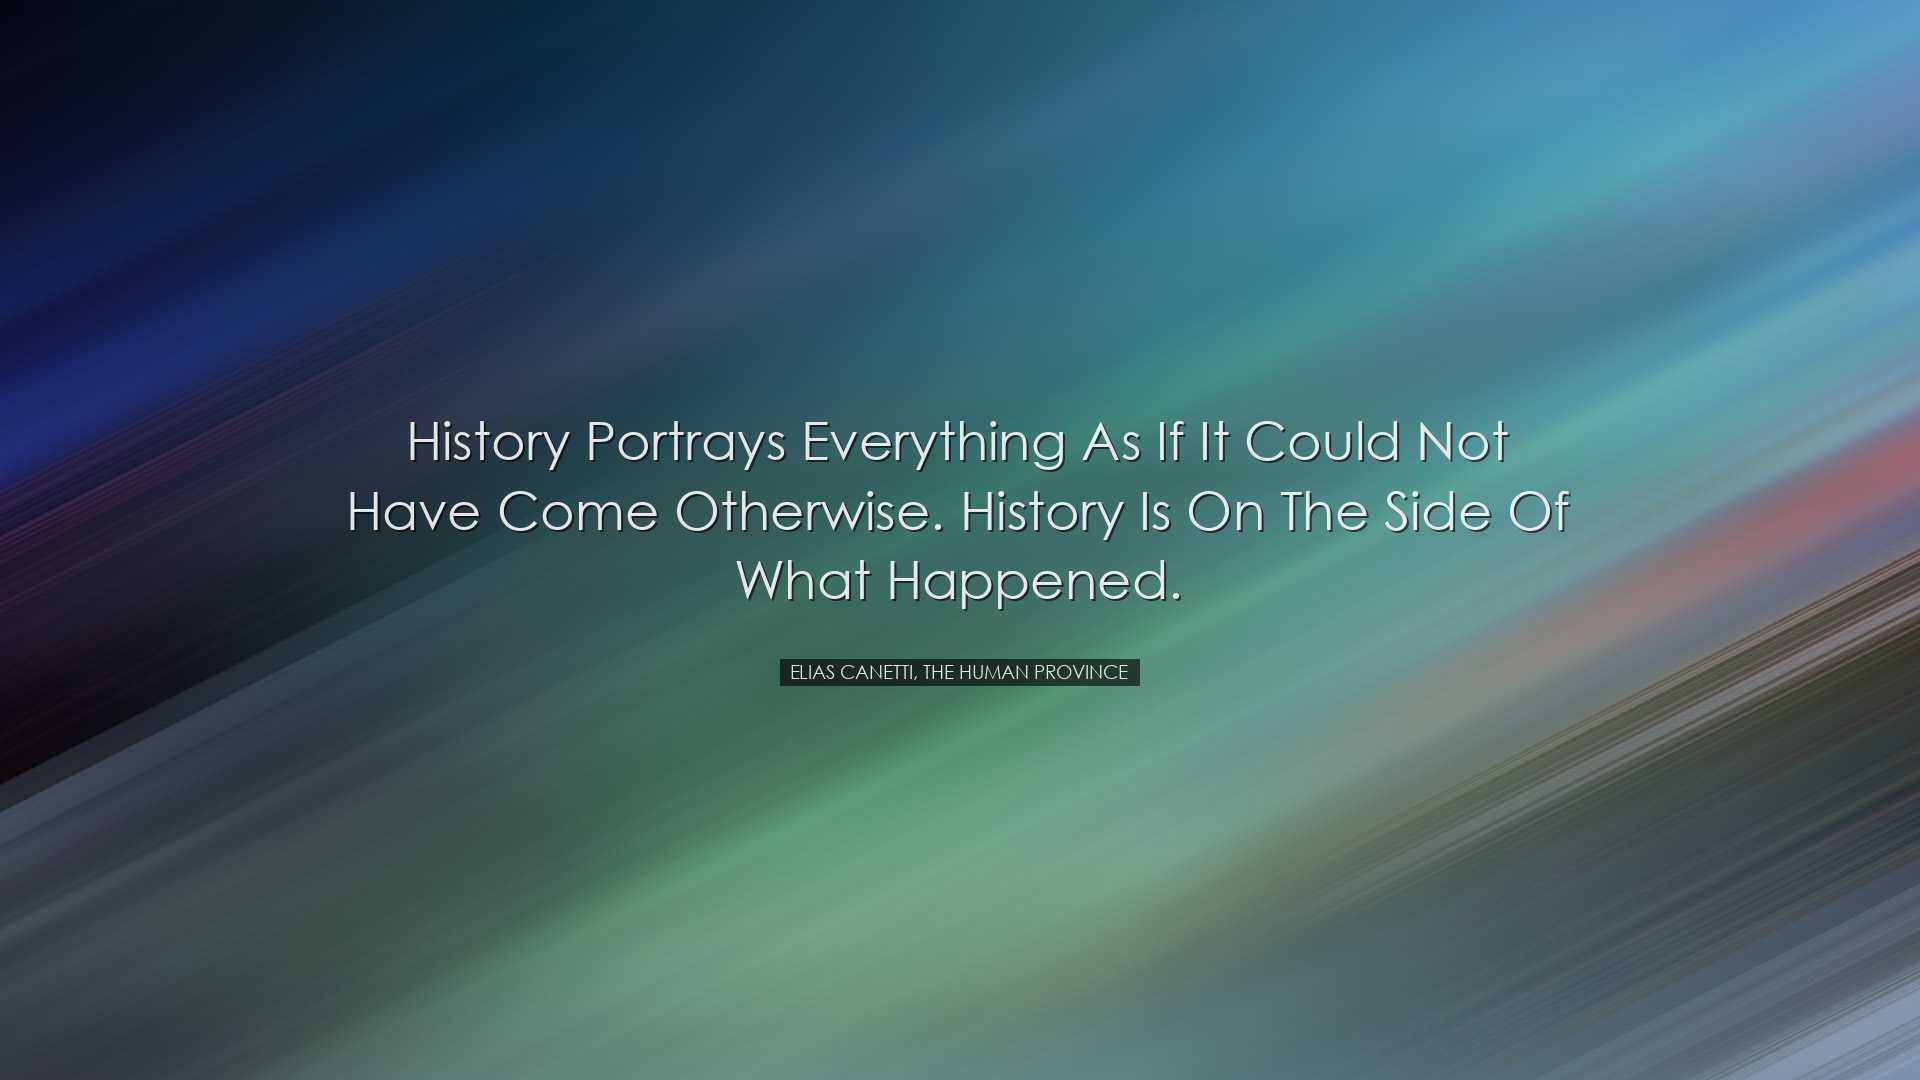 History portrays everything as if it could not have come otherwise